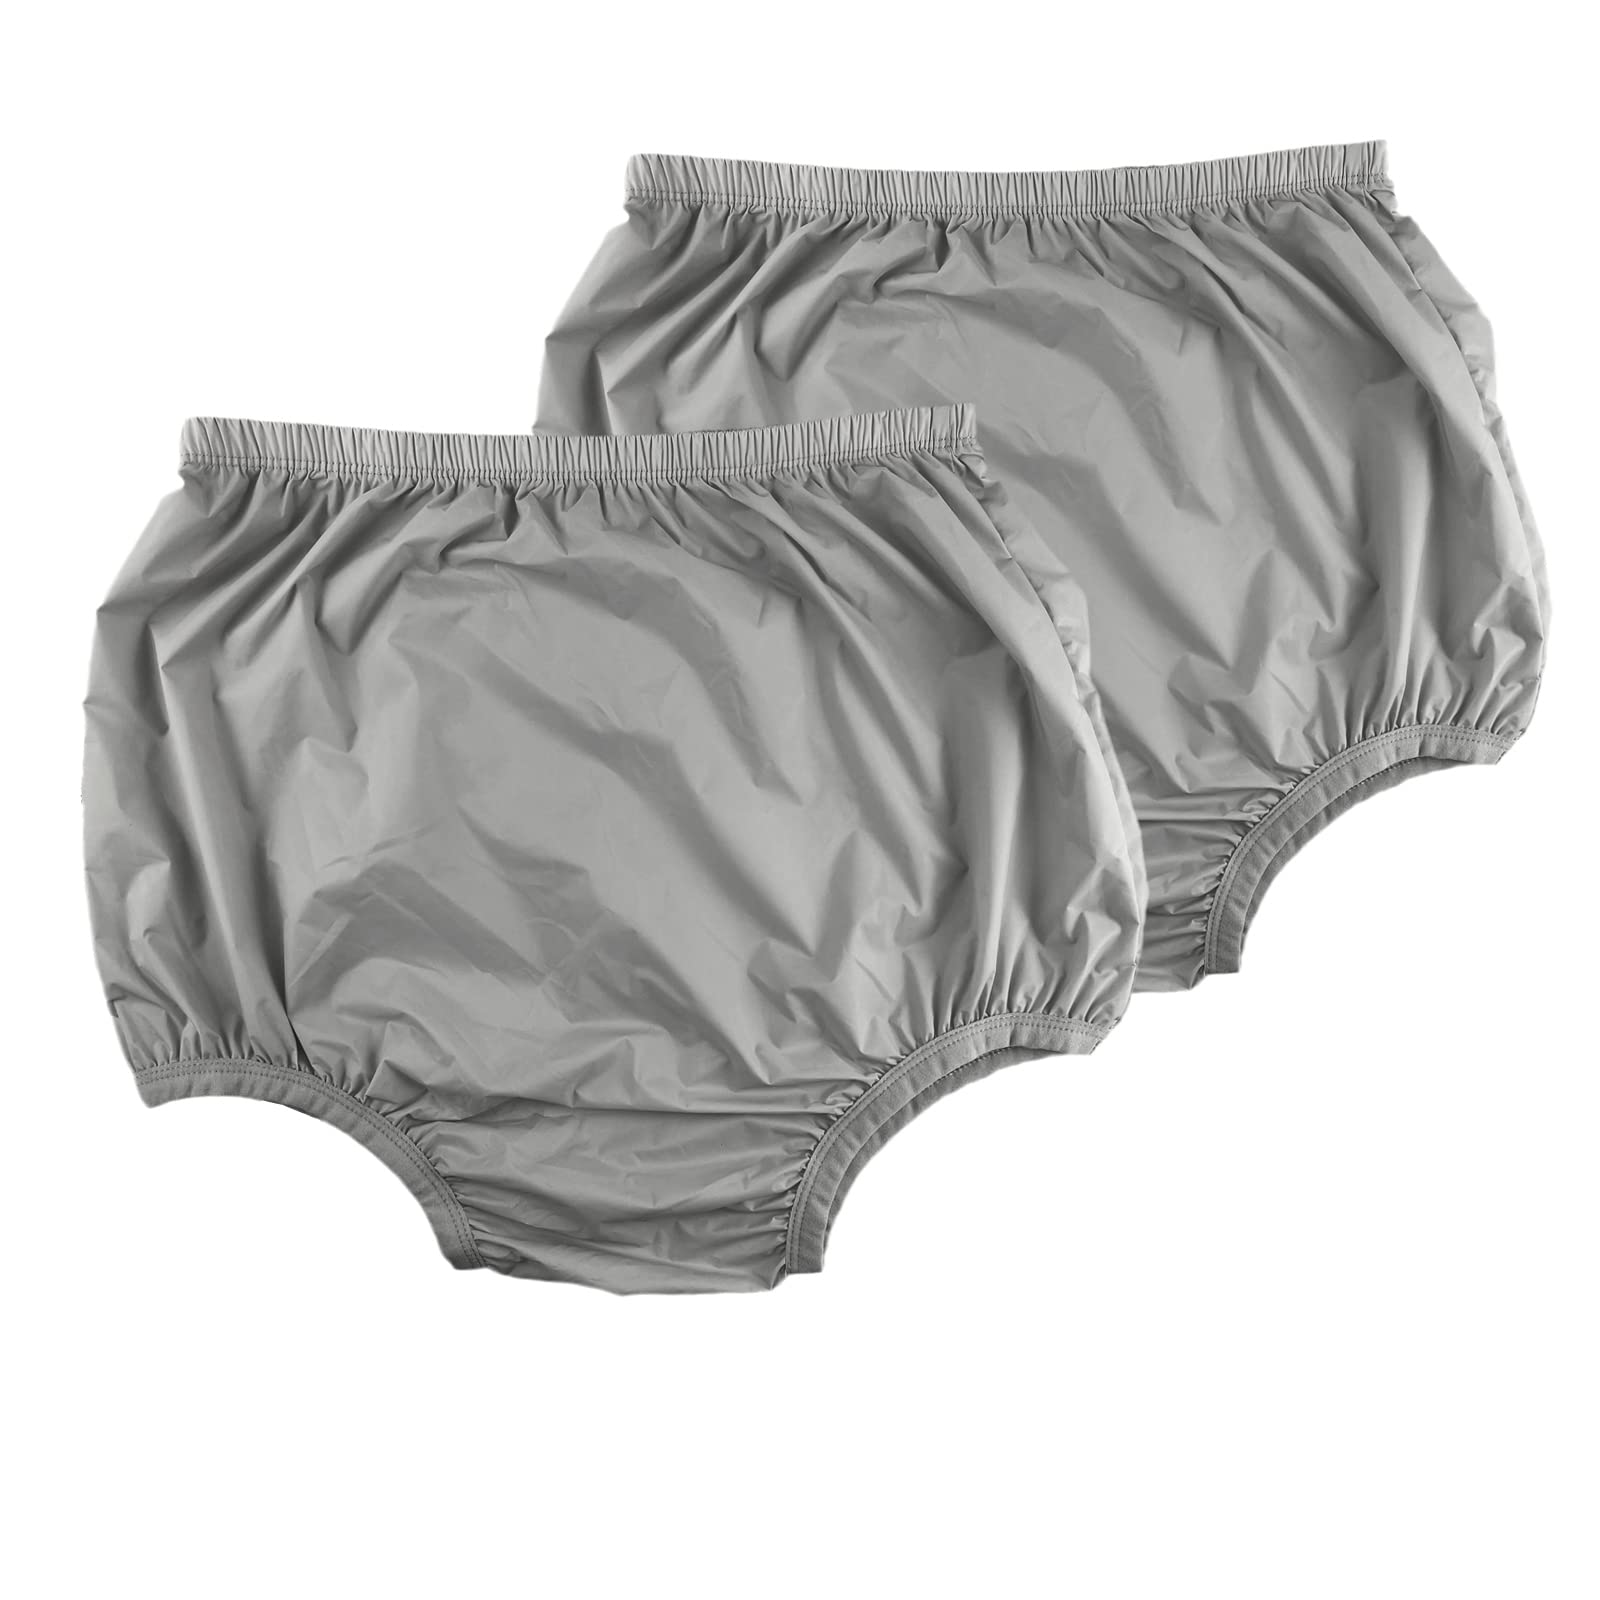 Adult Leakproof Underwear for Incontinence, Washable Low Noise